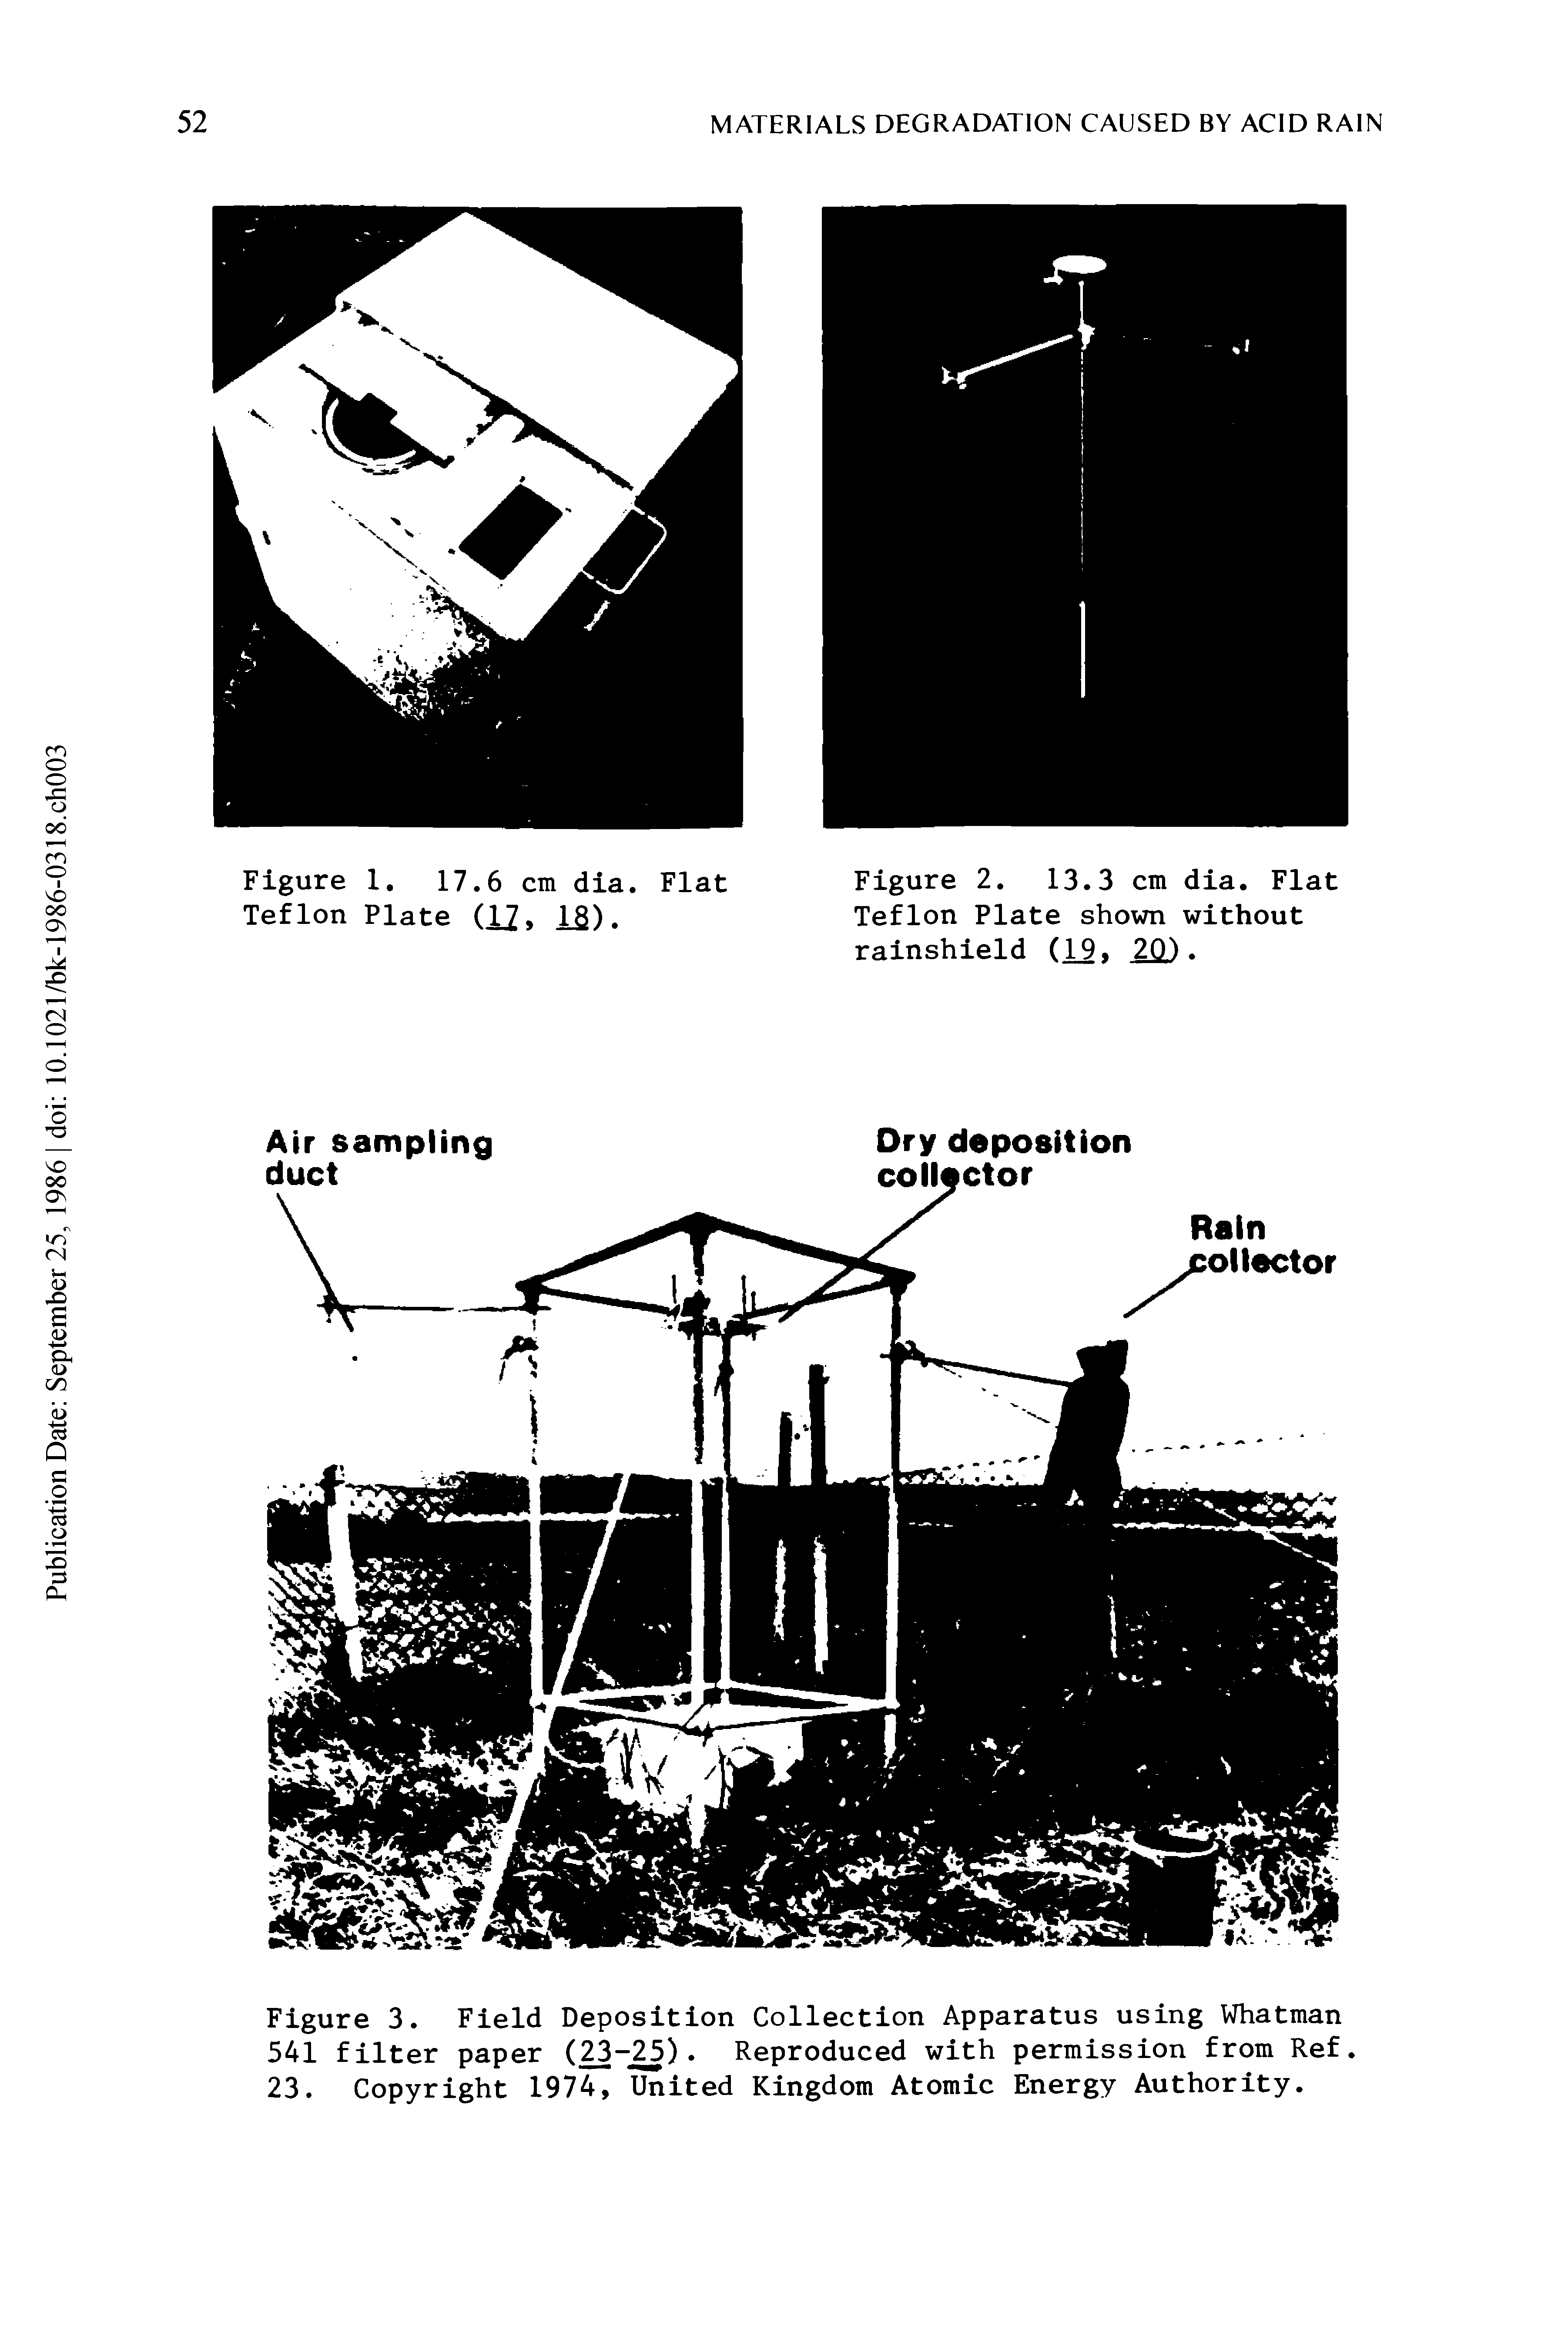 Figure 3. Field Deposition Collection Apparatus using Whatman 541 filter paper (23-2 ) Reproduced with permission from Ref. 23. Copyright 1974, United Kingdom Atomic Energy Authority.